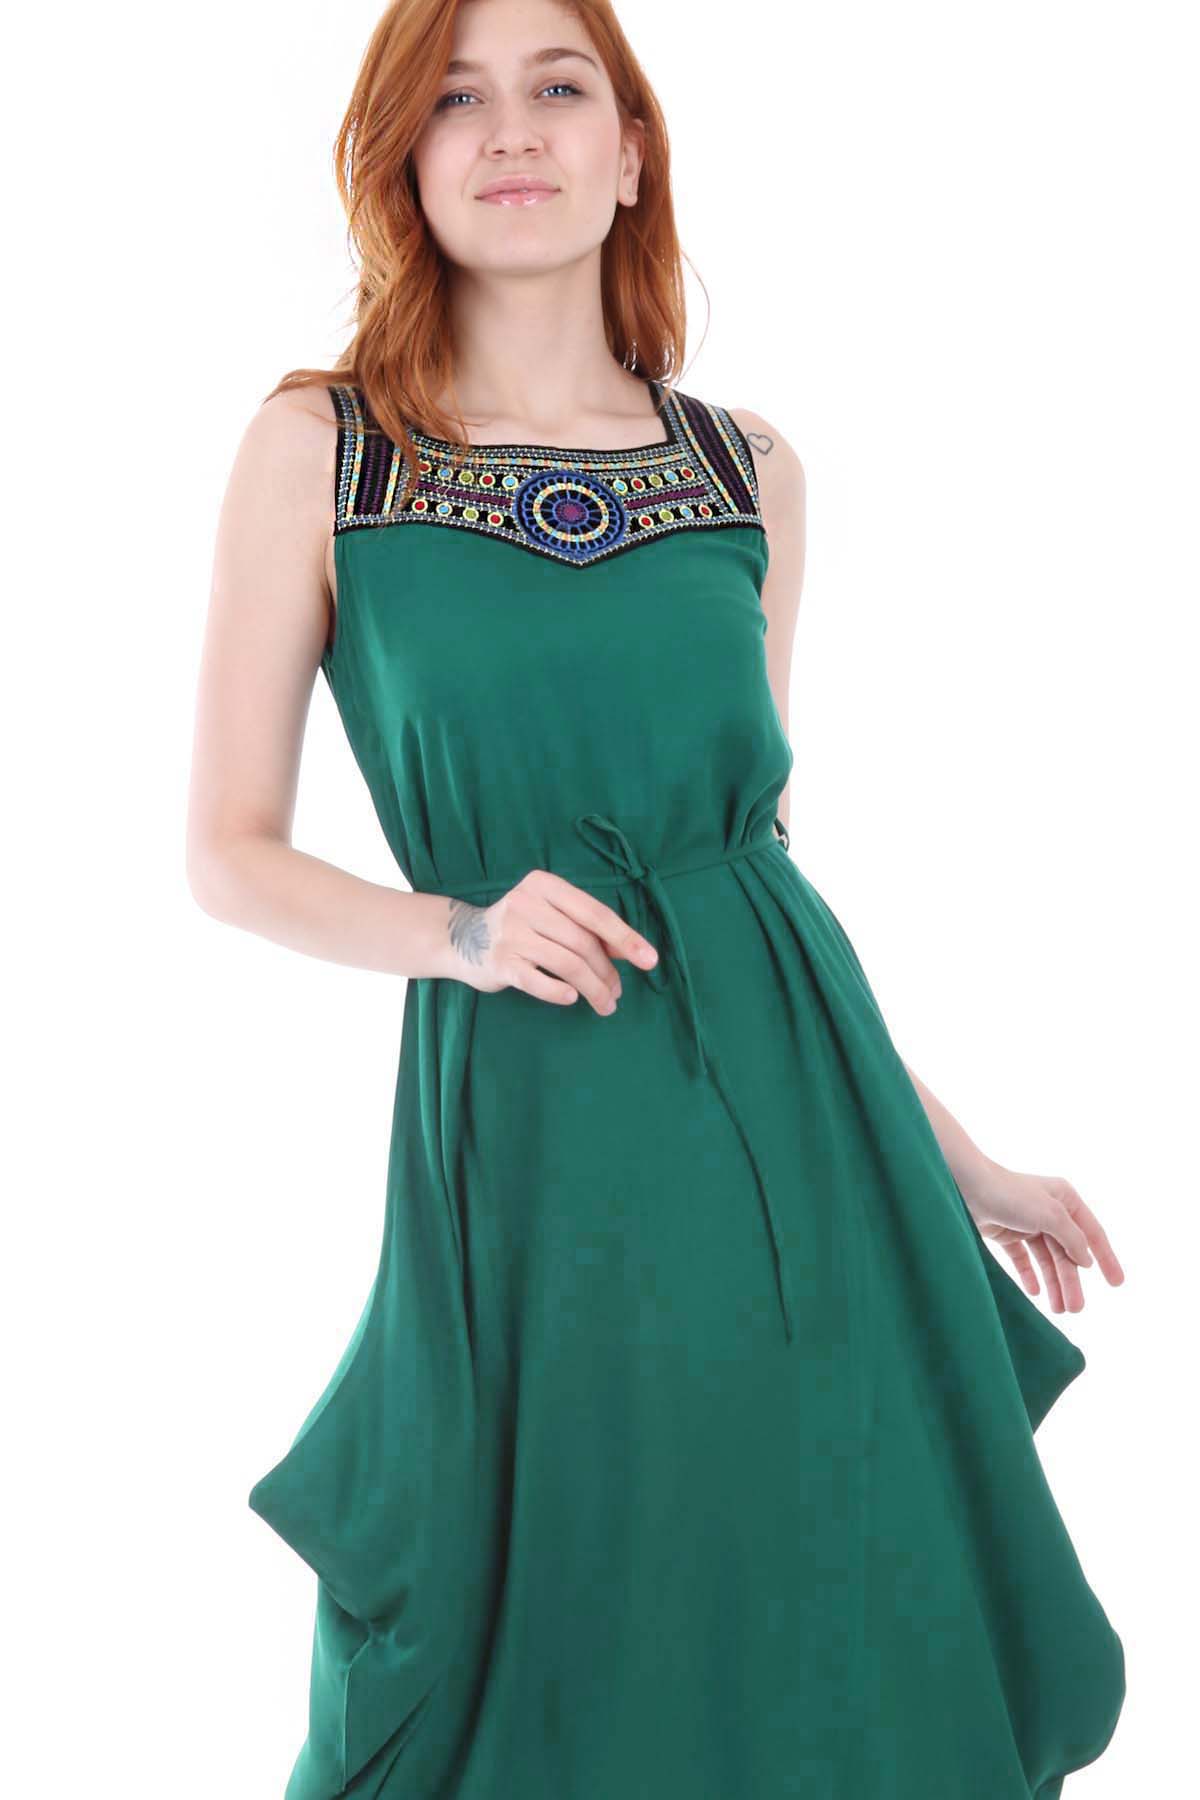 A model wears 45931 - Dress - Green, wholesale Dress of Bigdart to display at Lonca